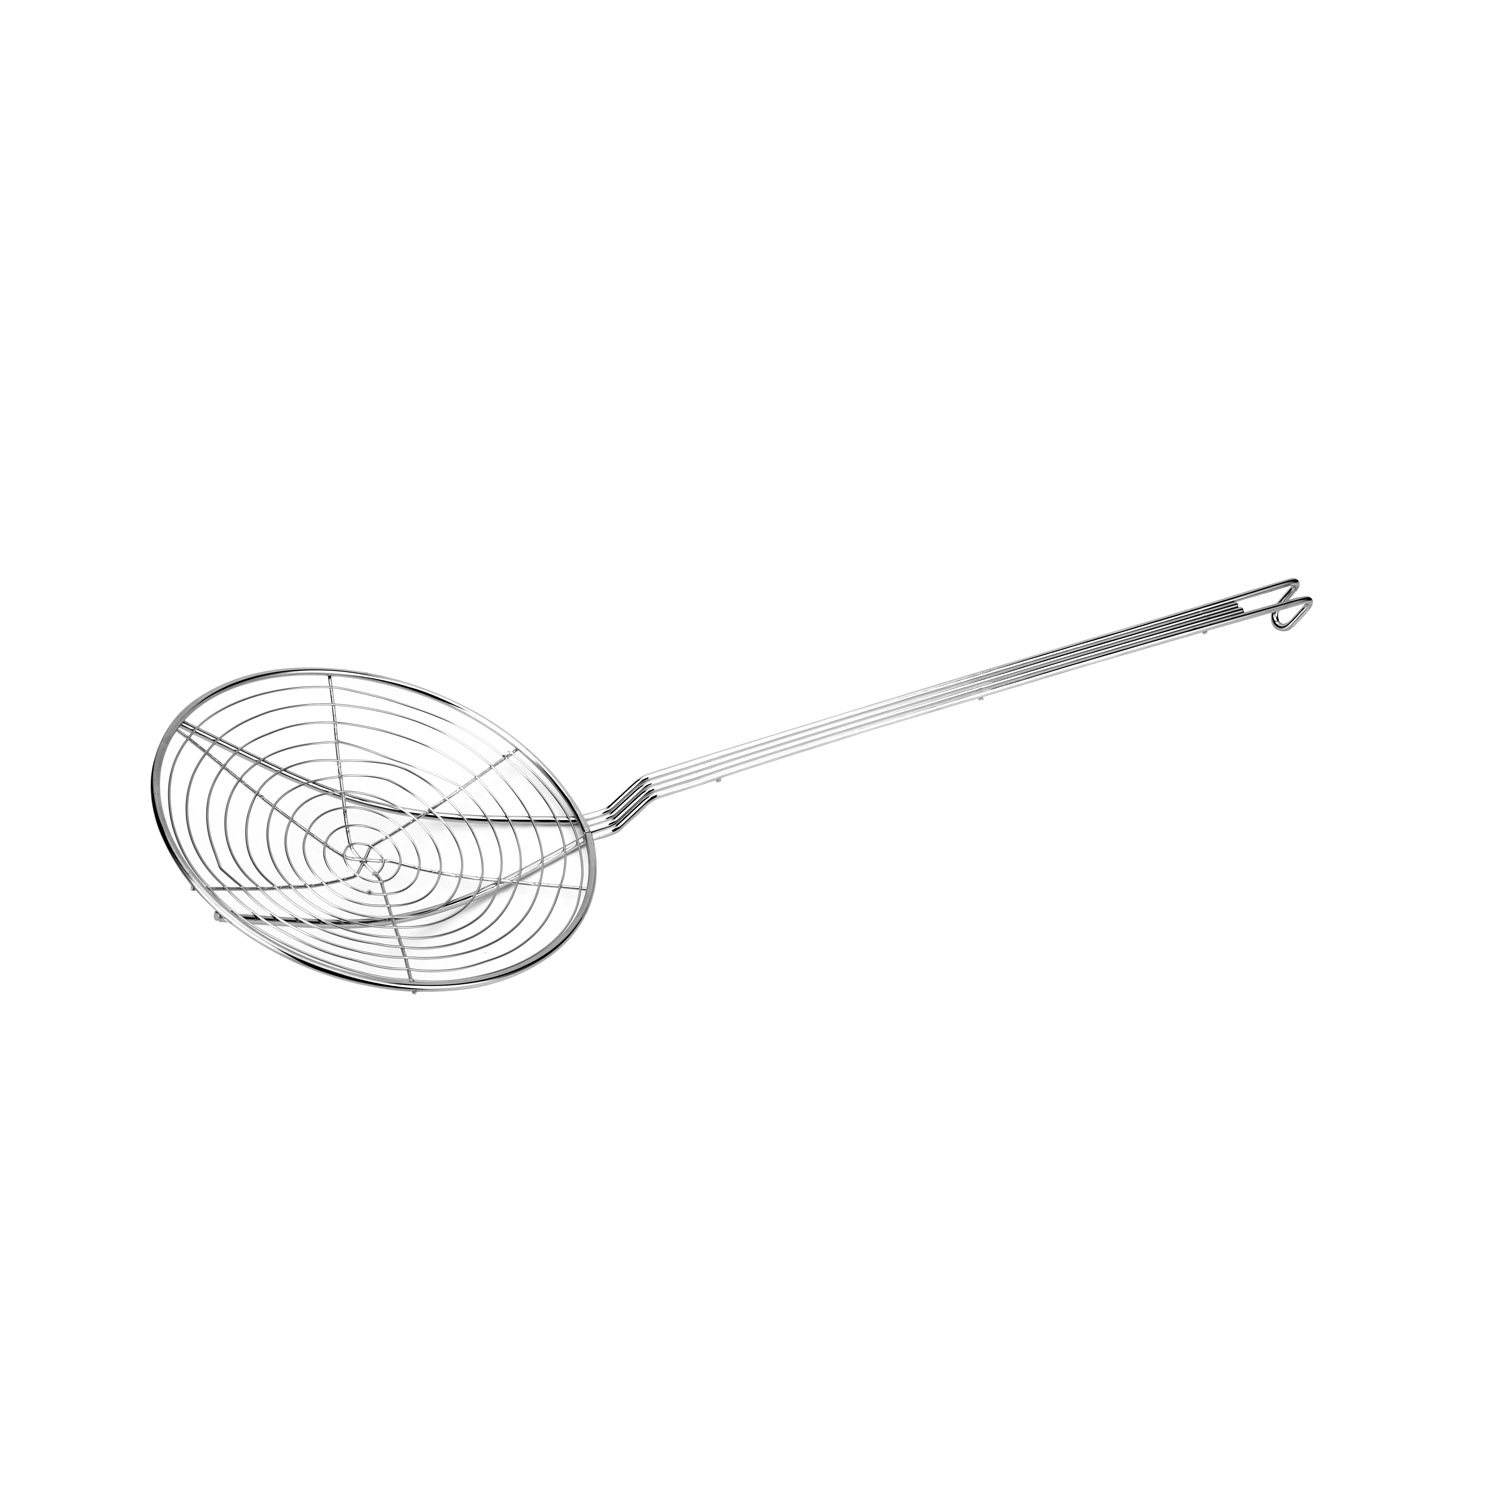 CAC China SKSP-07 Spiral Nickel-Plated Wire Skimmer 7" Dia